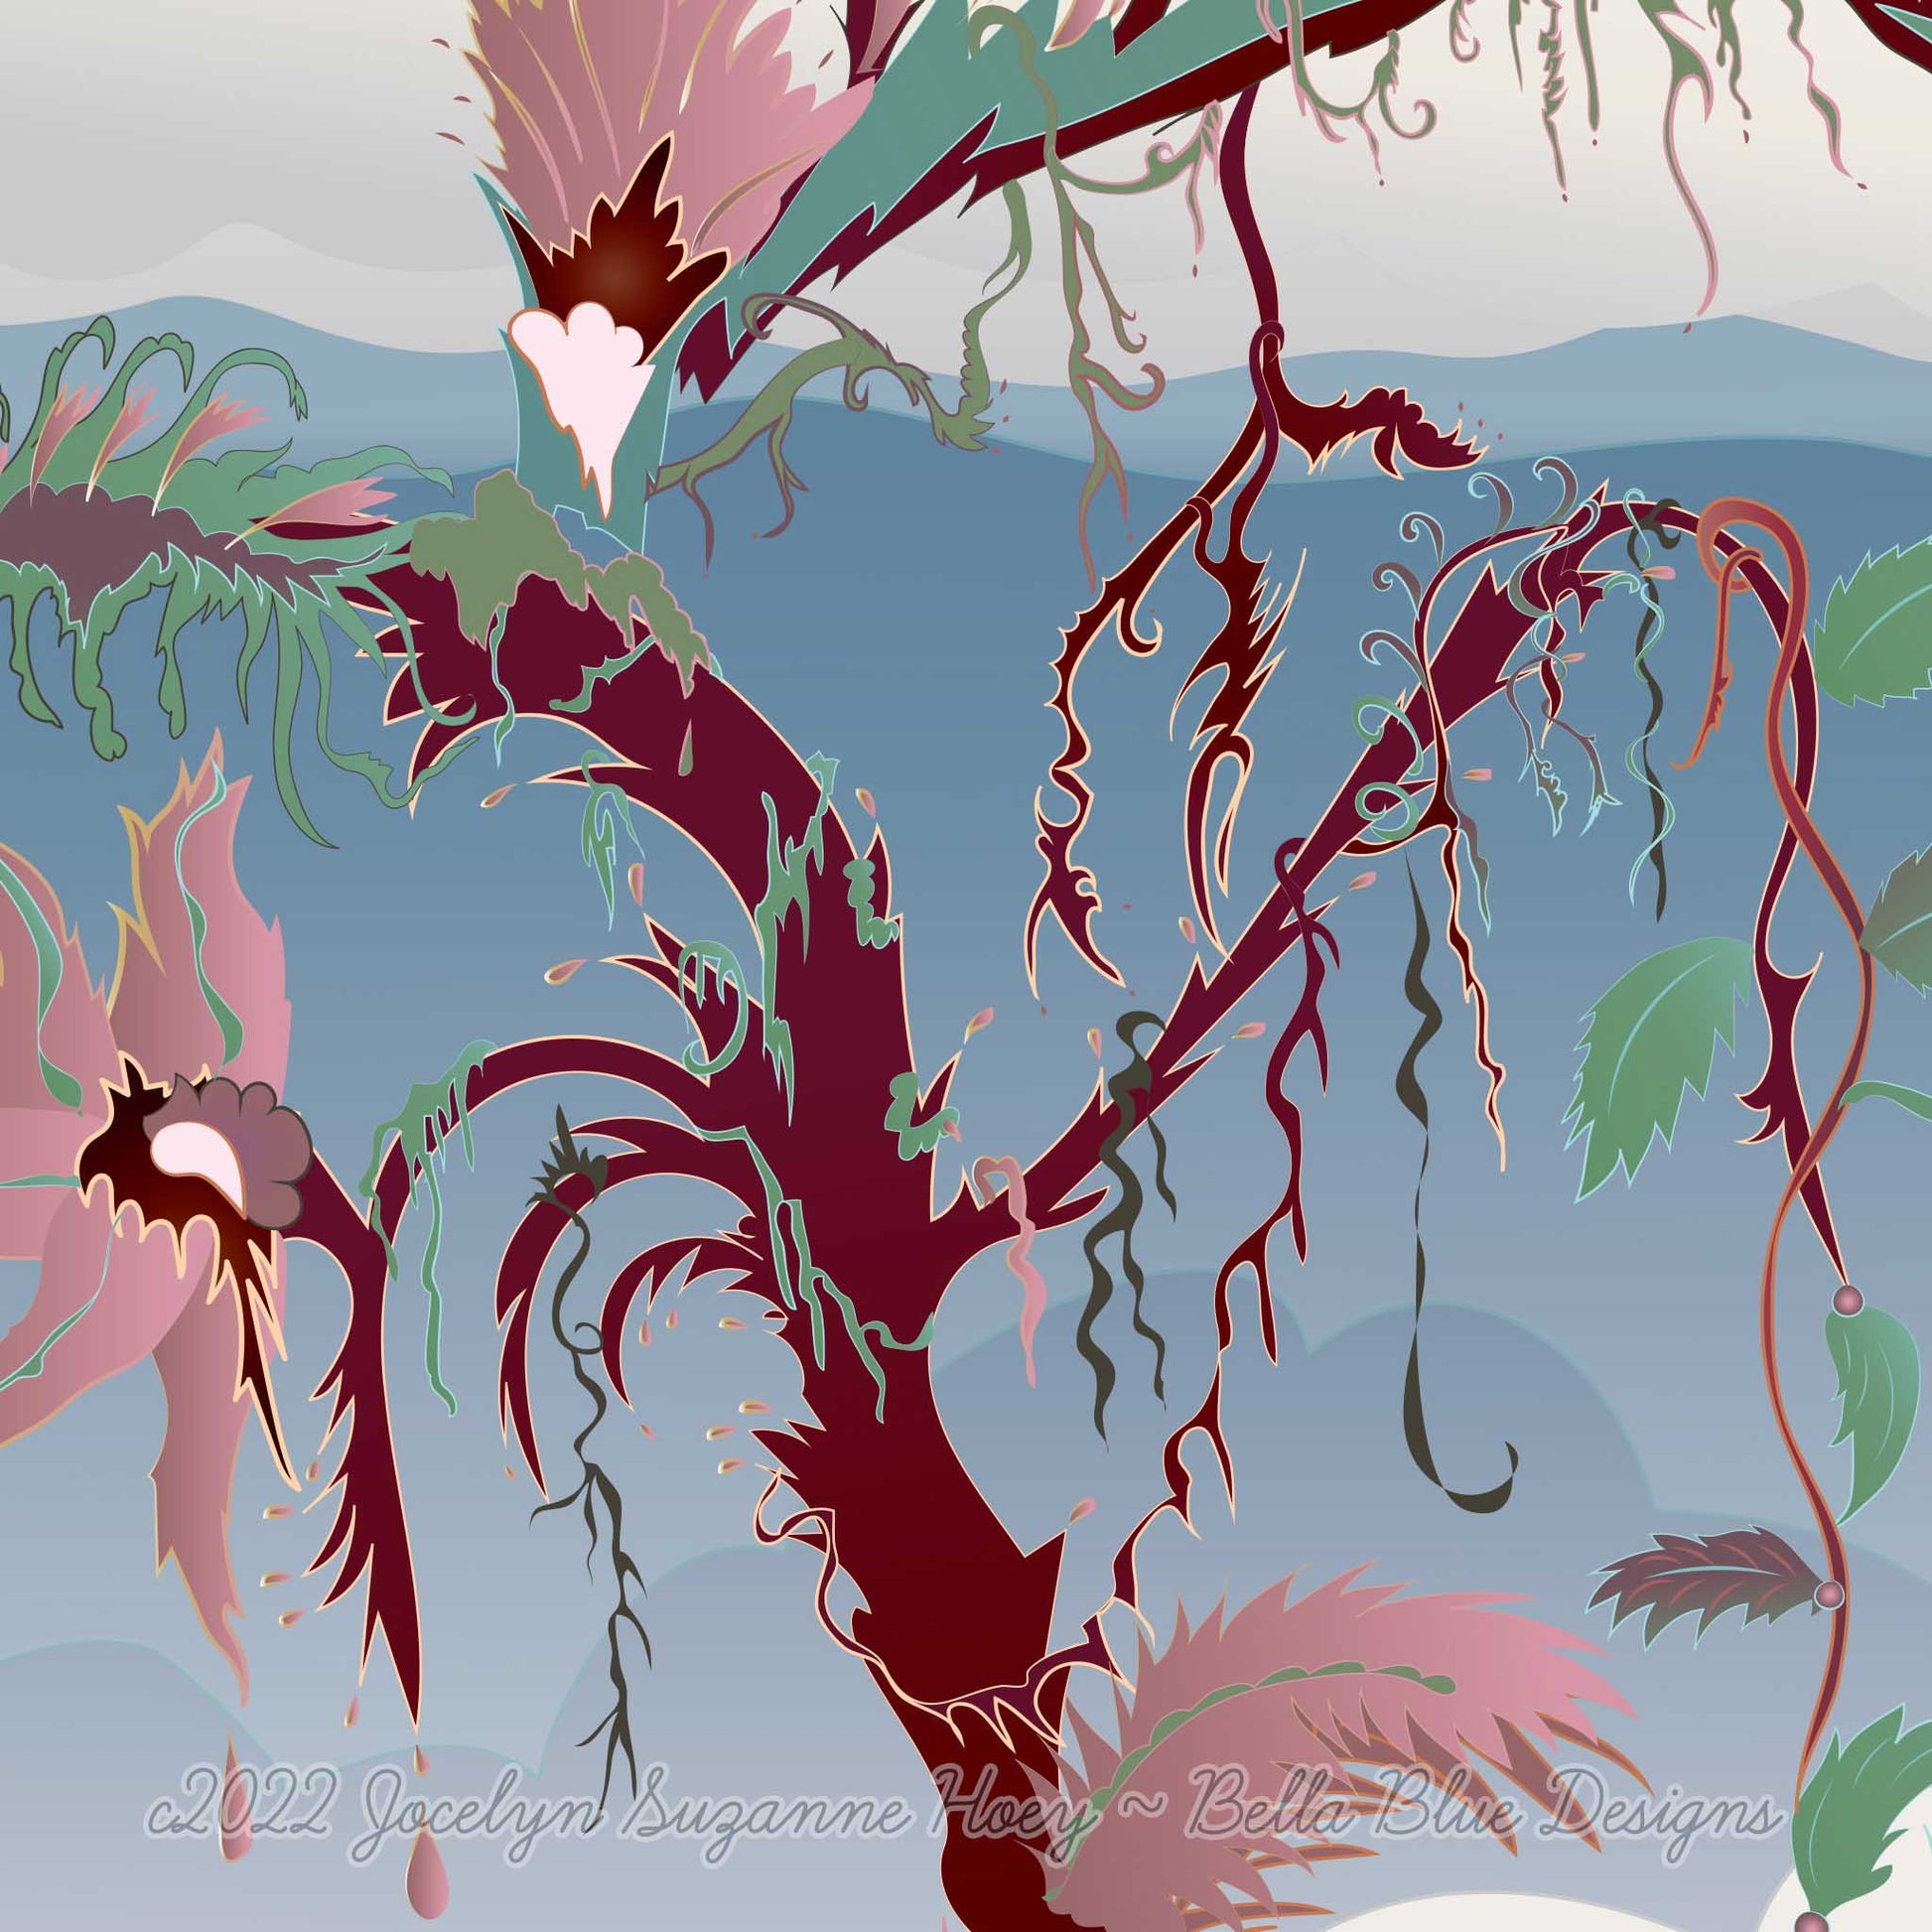 closeup from the digital design illustration of the hummingbird queen, showing trees and their branches